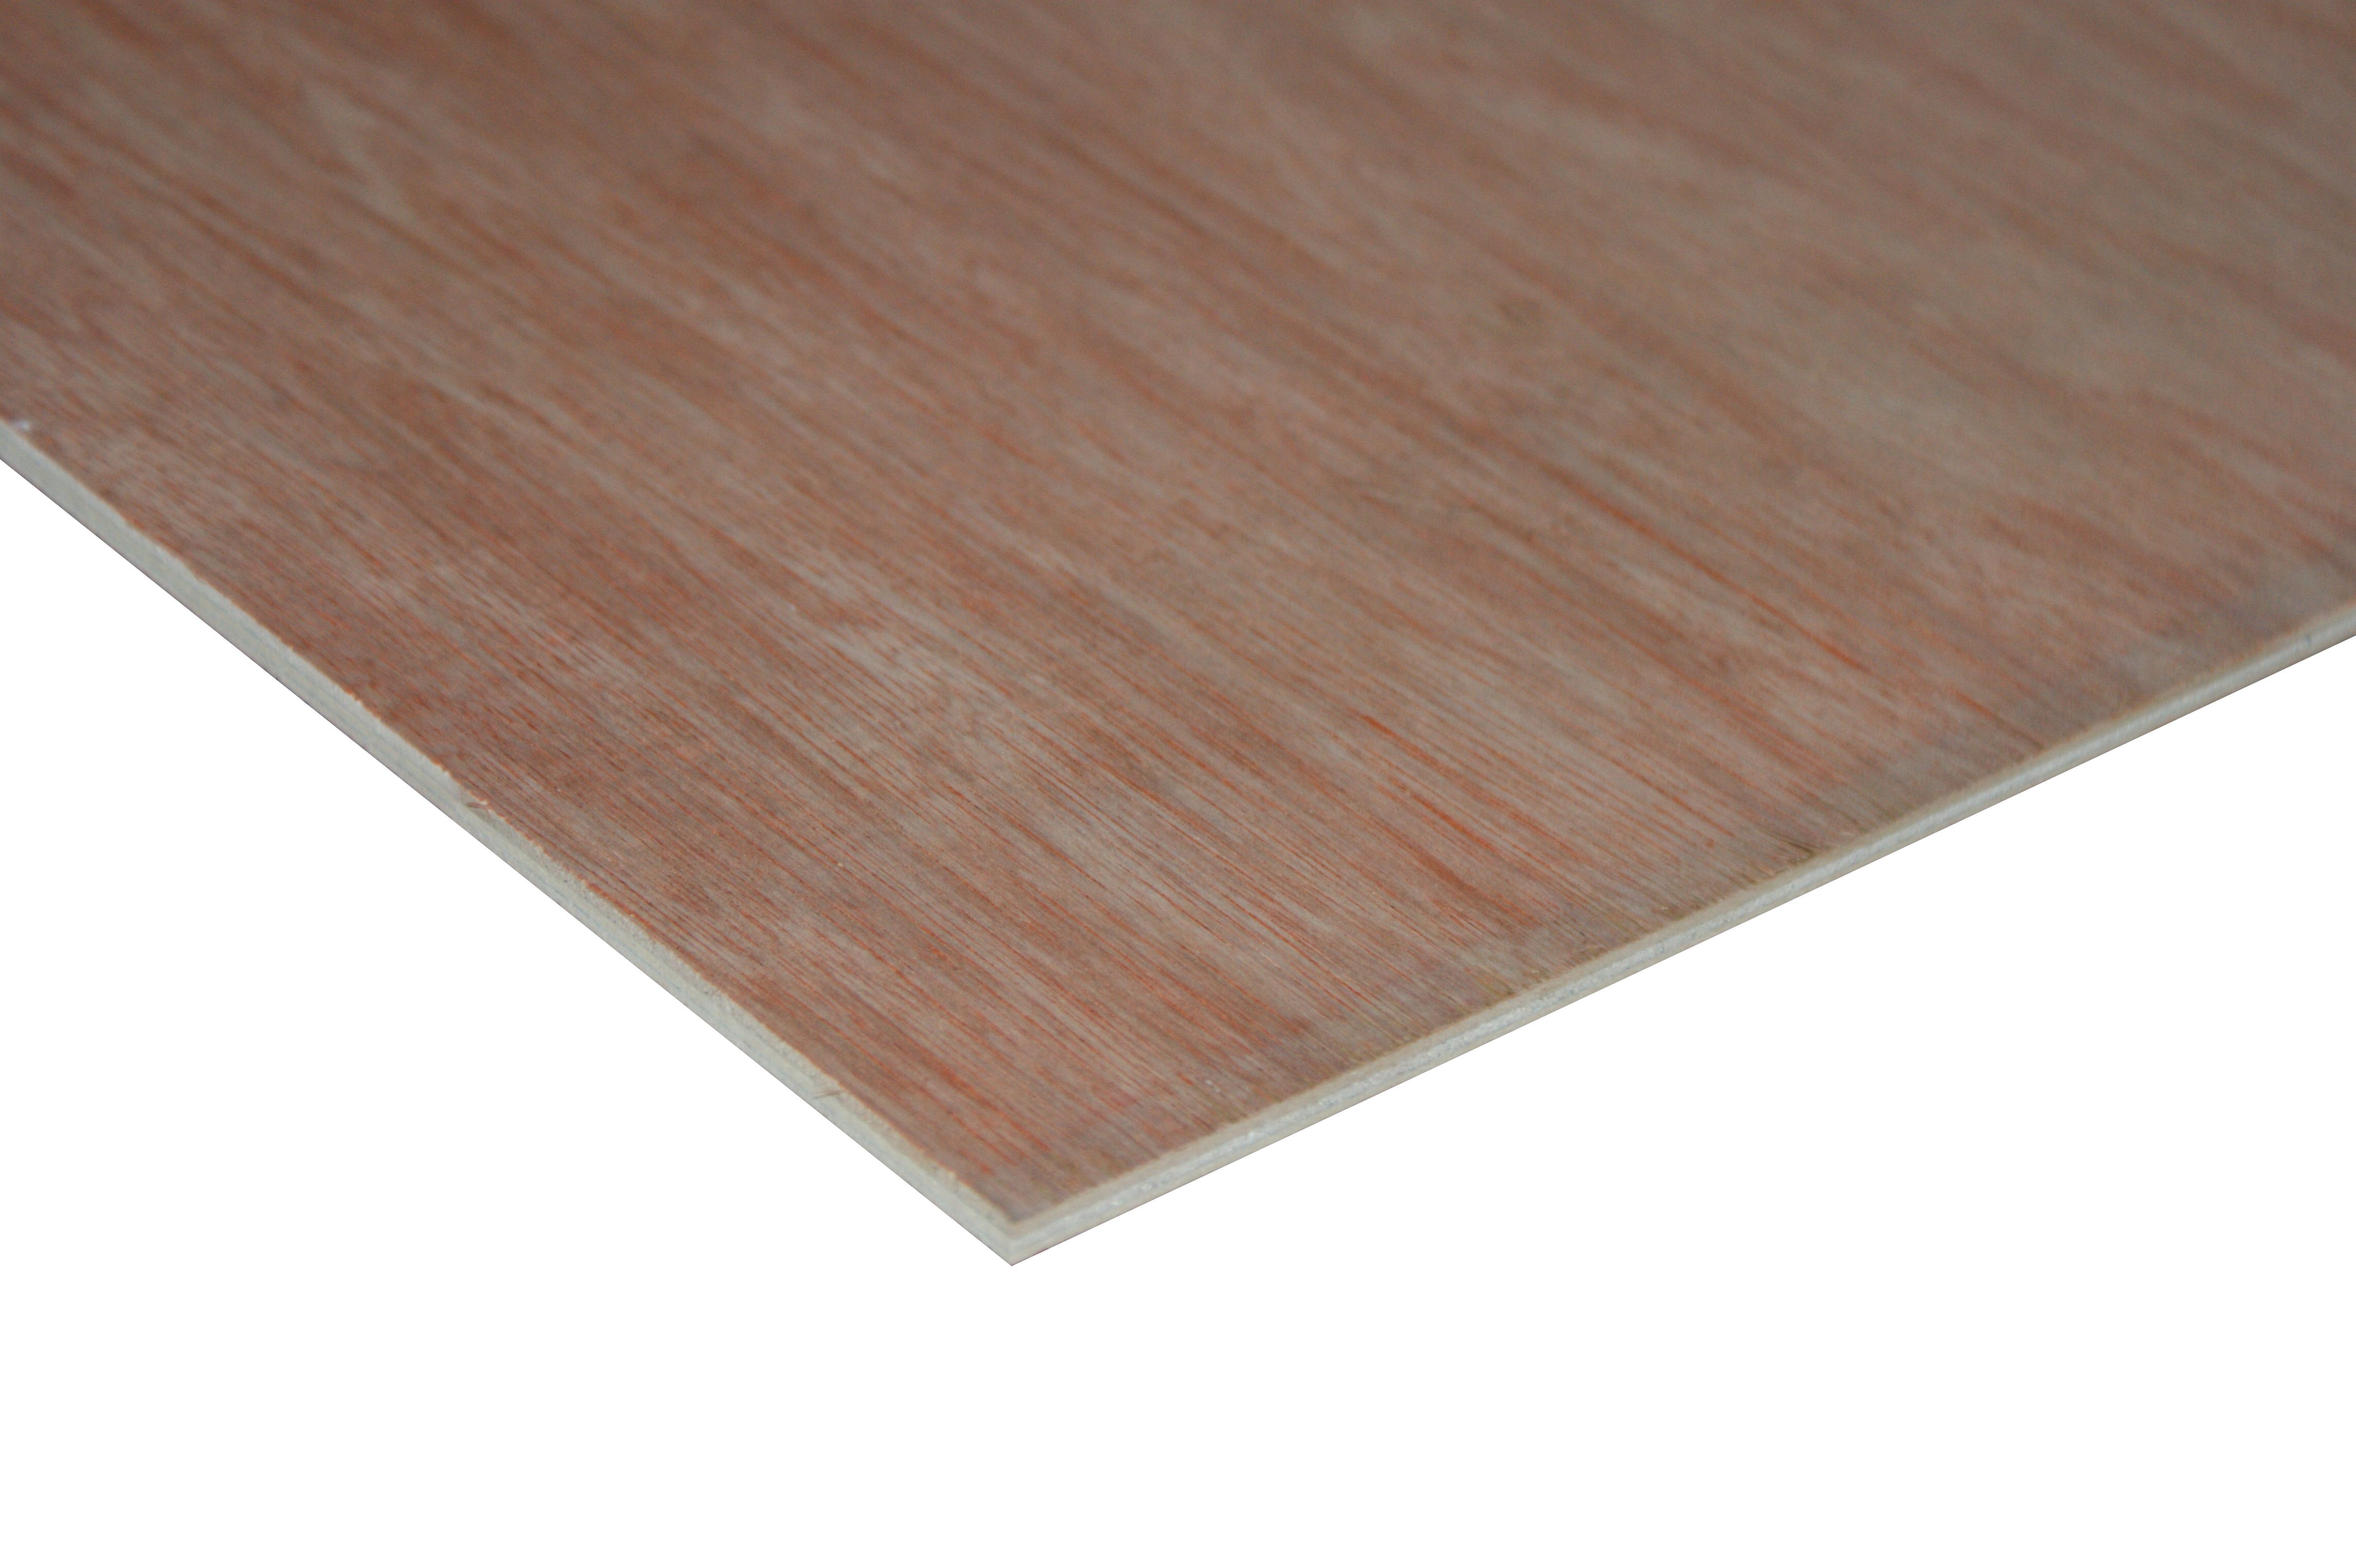 Non-Structural Hardwood Plywood Sheet - 5.5 x 606 x 1220mm